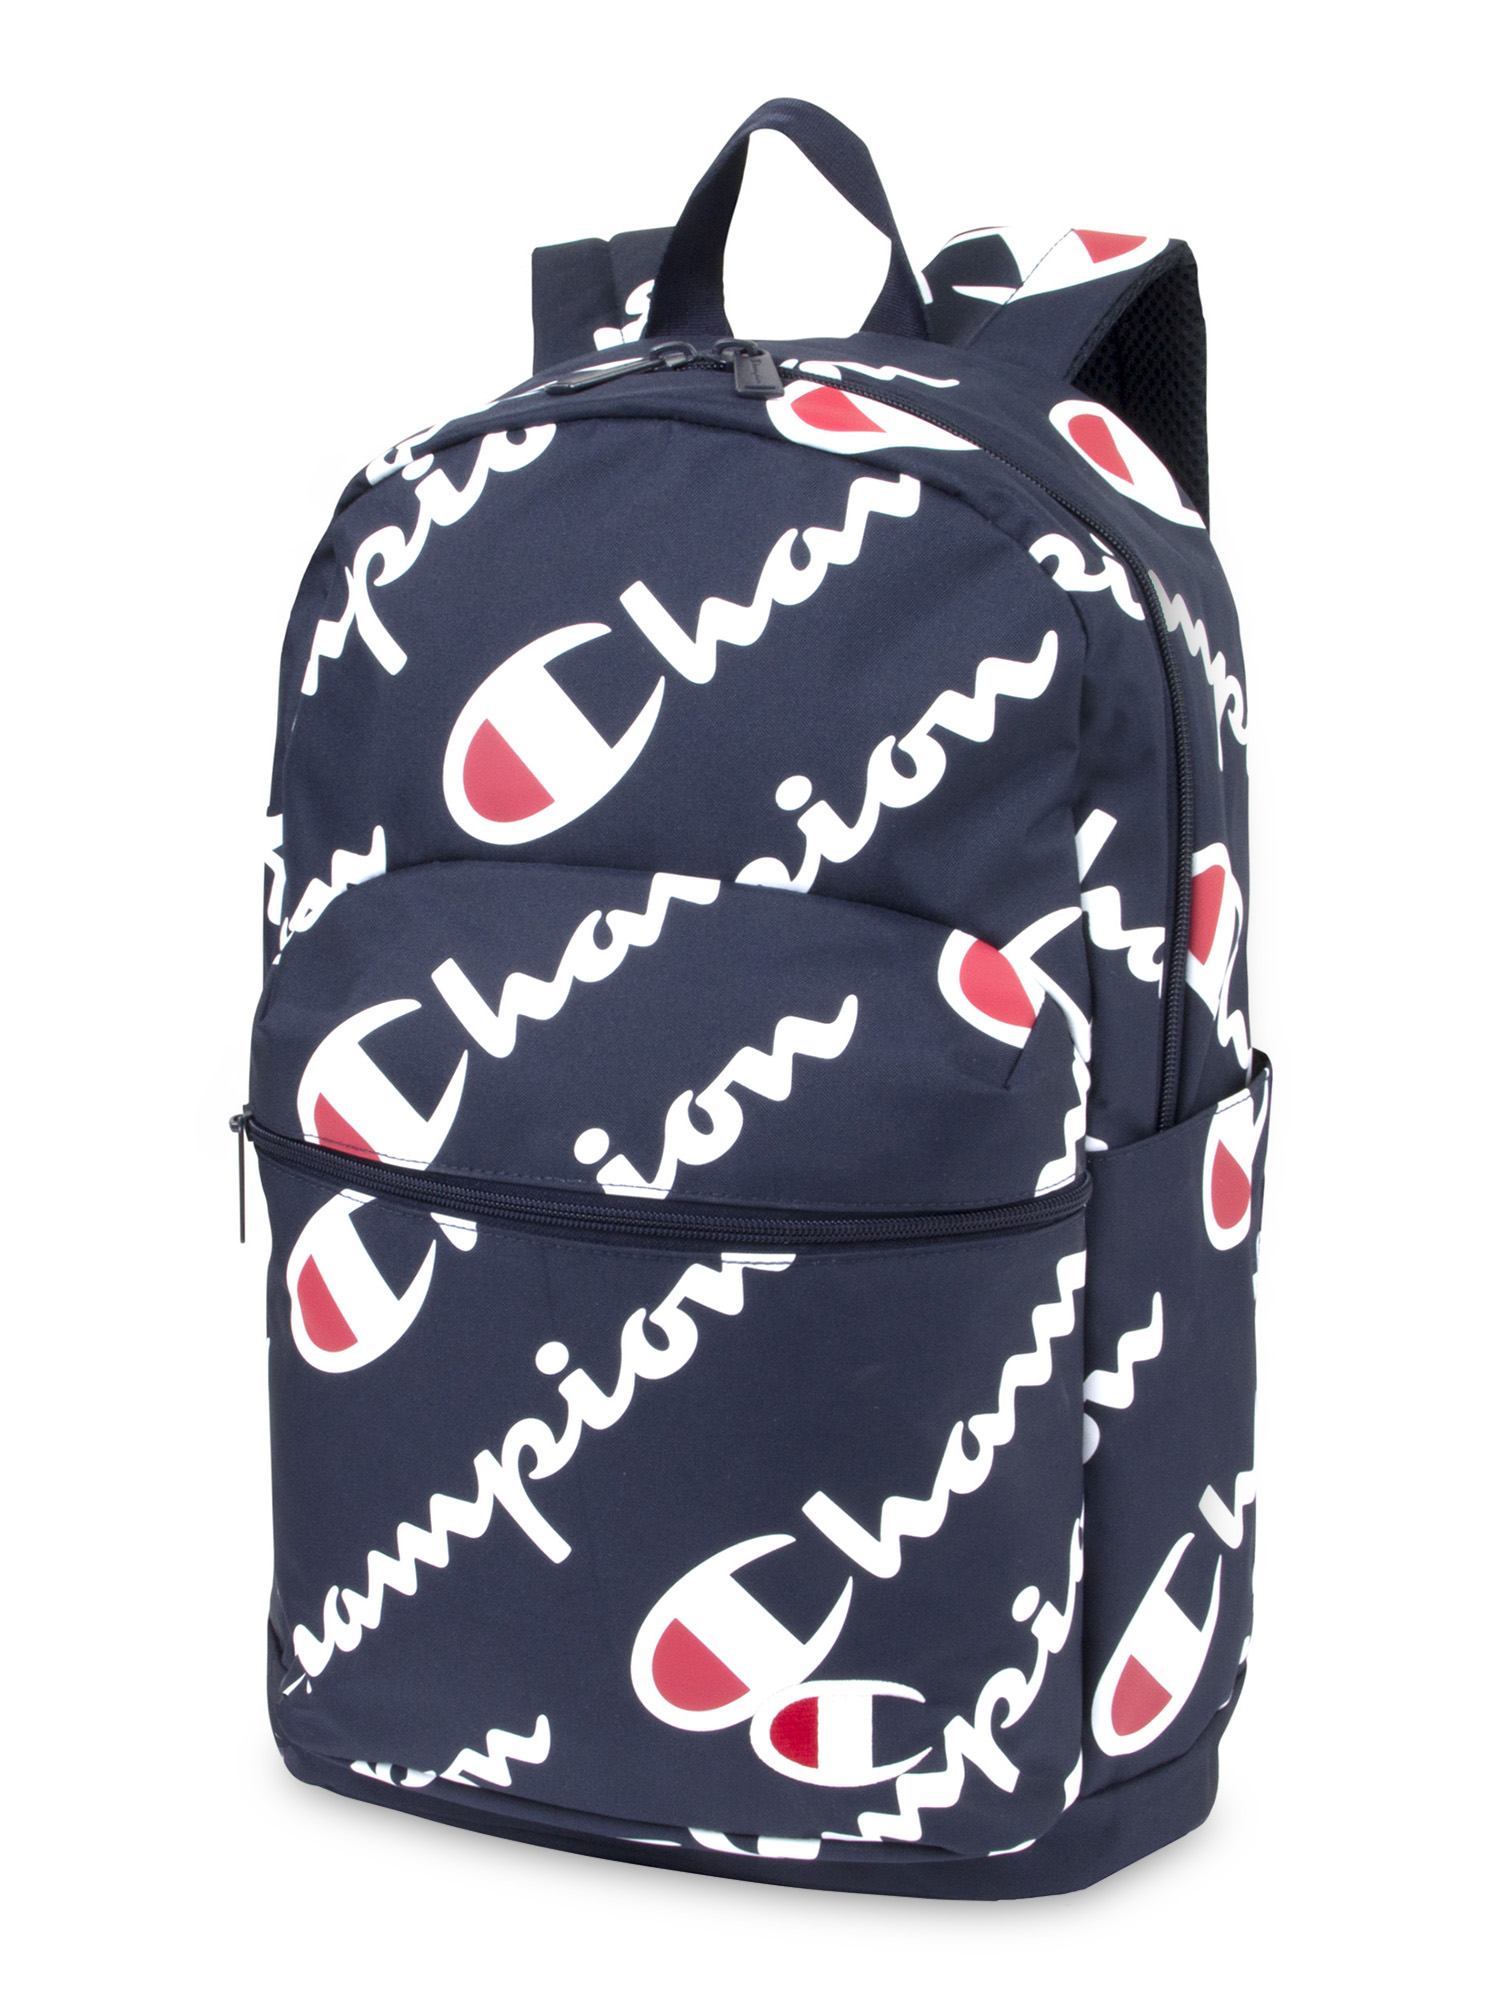 Champion Youth Supercize Backpack - image 1 of 1